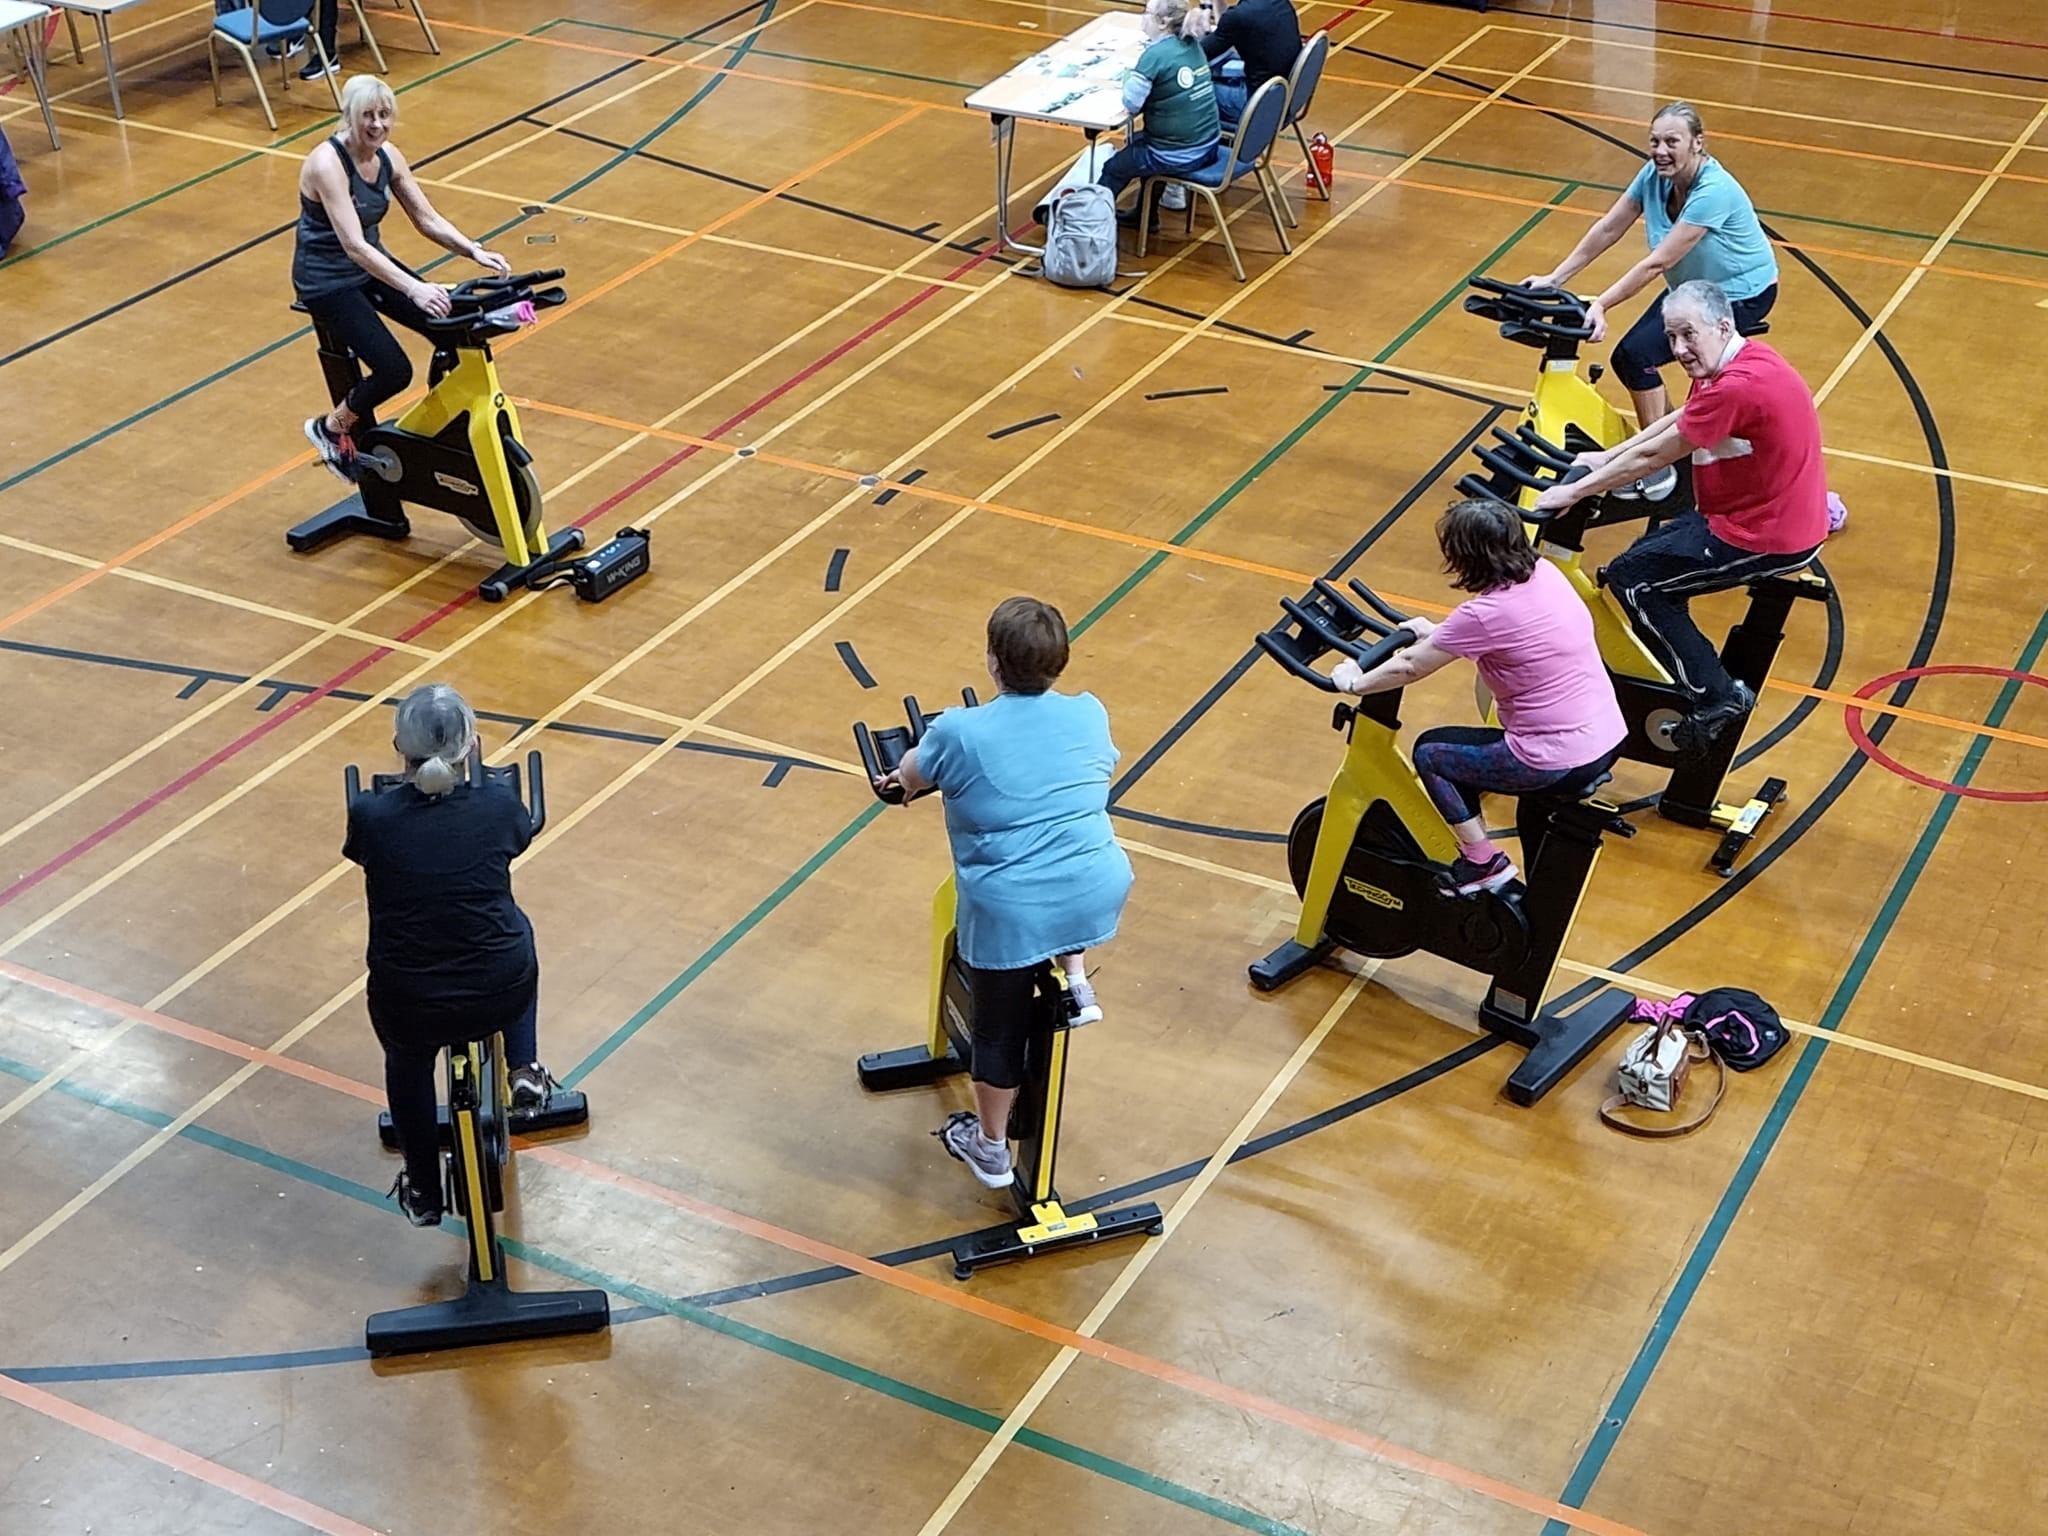 Over 50s spinning activity during an Open Day activity at Plas Arthur Leisure Centre, in Llangefni